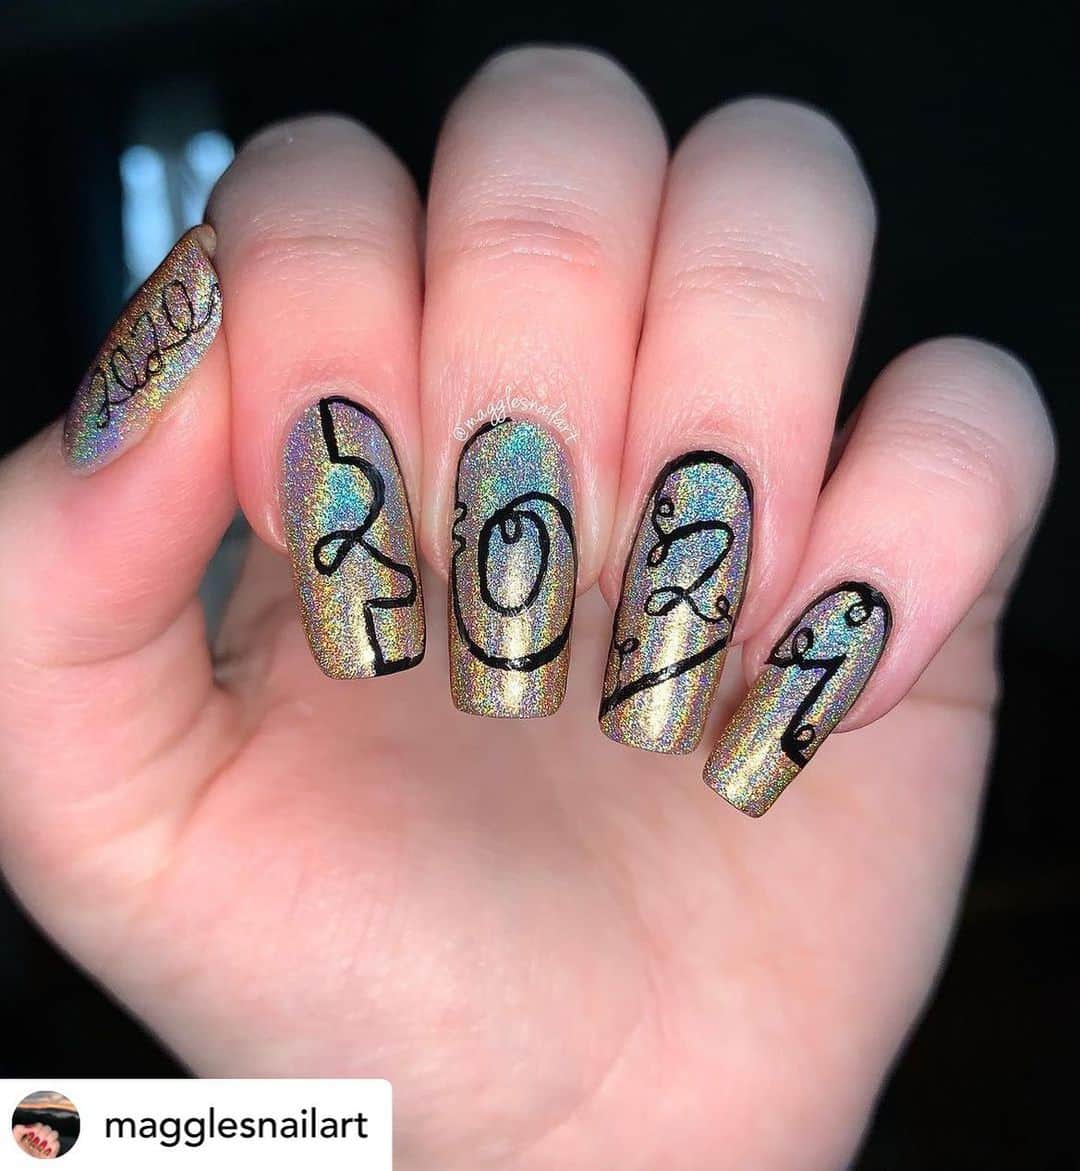 Nail Designsさんのインスタグラム写真 - (Nail DesignsInstagram)「Credit• @magglesnailart H💿L💿 2021 Happy New Year’s Eve and Bye 2020! At least I am ending the 2020 on a good note, thank you so much for 1.5 thousand followers!🤯 I was feeling pretty uninspired by most New Years manis, and I came up with this idea! I think it perfectly sums up what 2021 will be confusing, difficult, but hopefully better than 2020! Swipe to see what’s on my thumb and some gorgeous H💿L💿! - - Products Used: Base Coat: @holotaco “Peely Base” @livelovepolish “Moonflower” and “Sweet Pea” Top Coat: @sechenails “Seche Vite” - - #livelovepolish #holotaco #holotacopeelybase #holotaconailart #livelovepolishbotanicalvenom #livelovepolishmoonflower #livelovepolishsweetpea #newyearsnails #newyearsnailart #2021nails #newyearseve #nails #nail #nailart #nailsofinstagram #nails💅 #nailsnailsnails #nailsdesign #nailsinspo #nails2inspire #bye2020 #naturalnails #squigglenails #abstractnails #holidaynails #holodays #holo #holonails #holonailpolish #nailspafeature」1月5日 10時02分 - nailartfeature